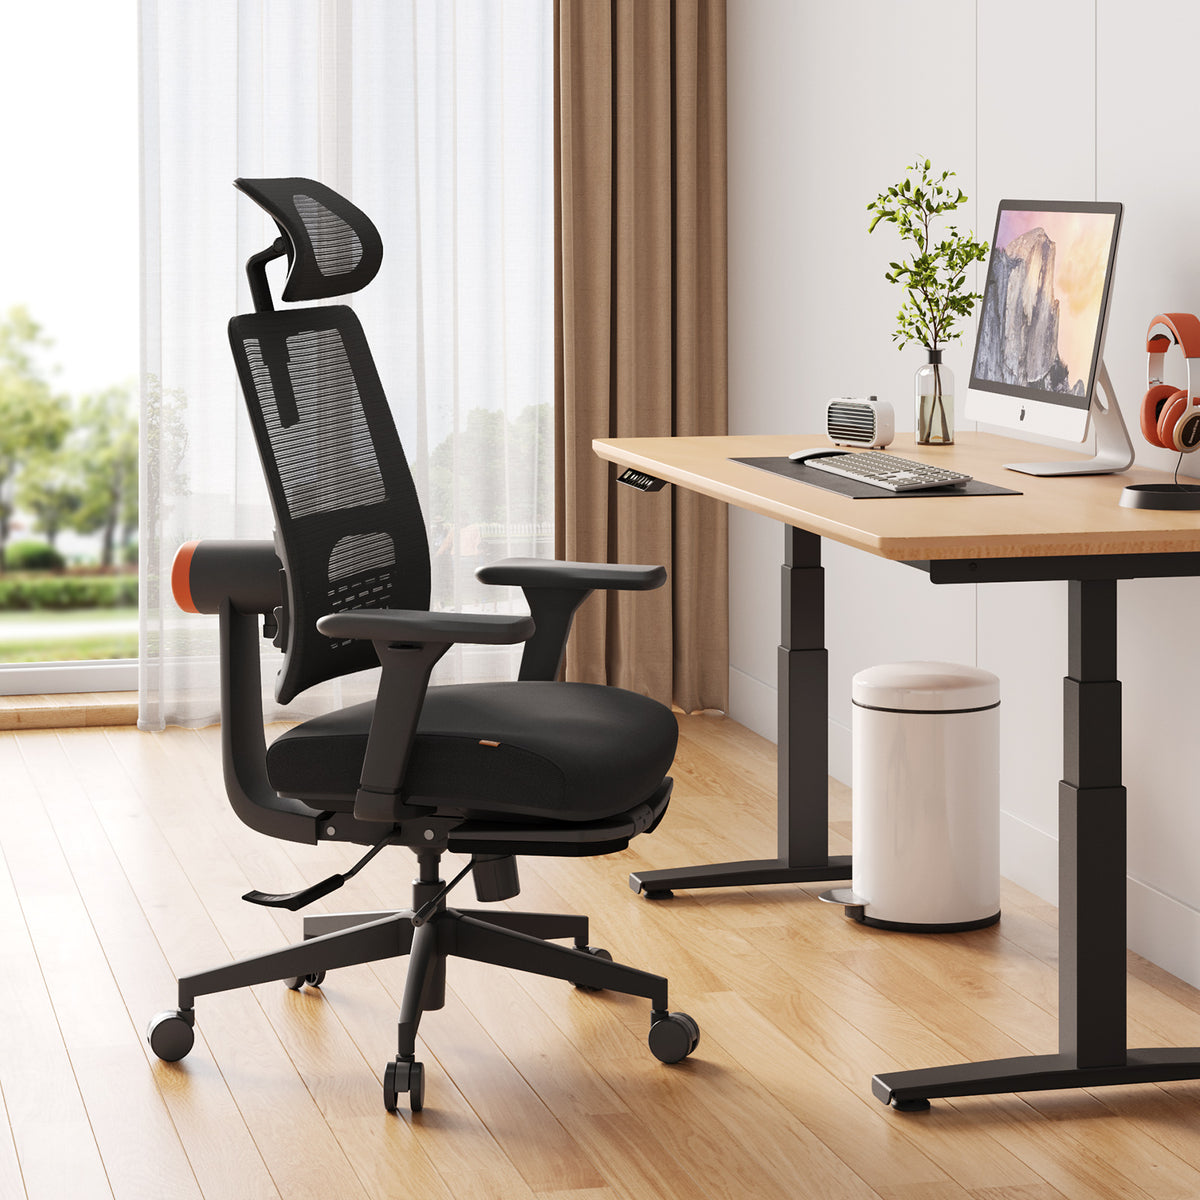 Magic H Ergonomic Office Chair with Auto-following Lumbar Support - black